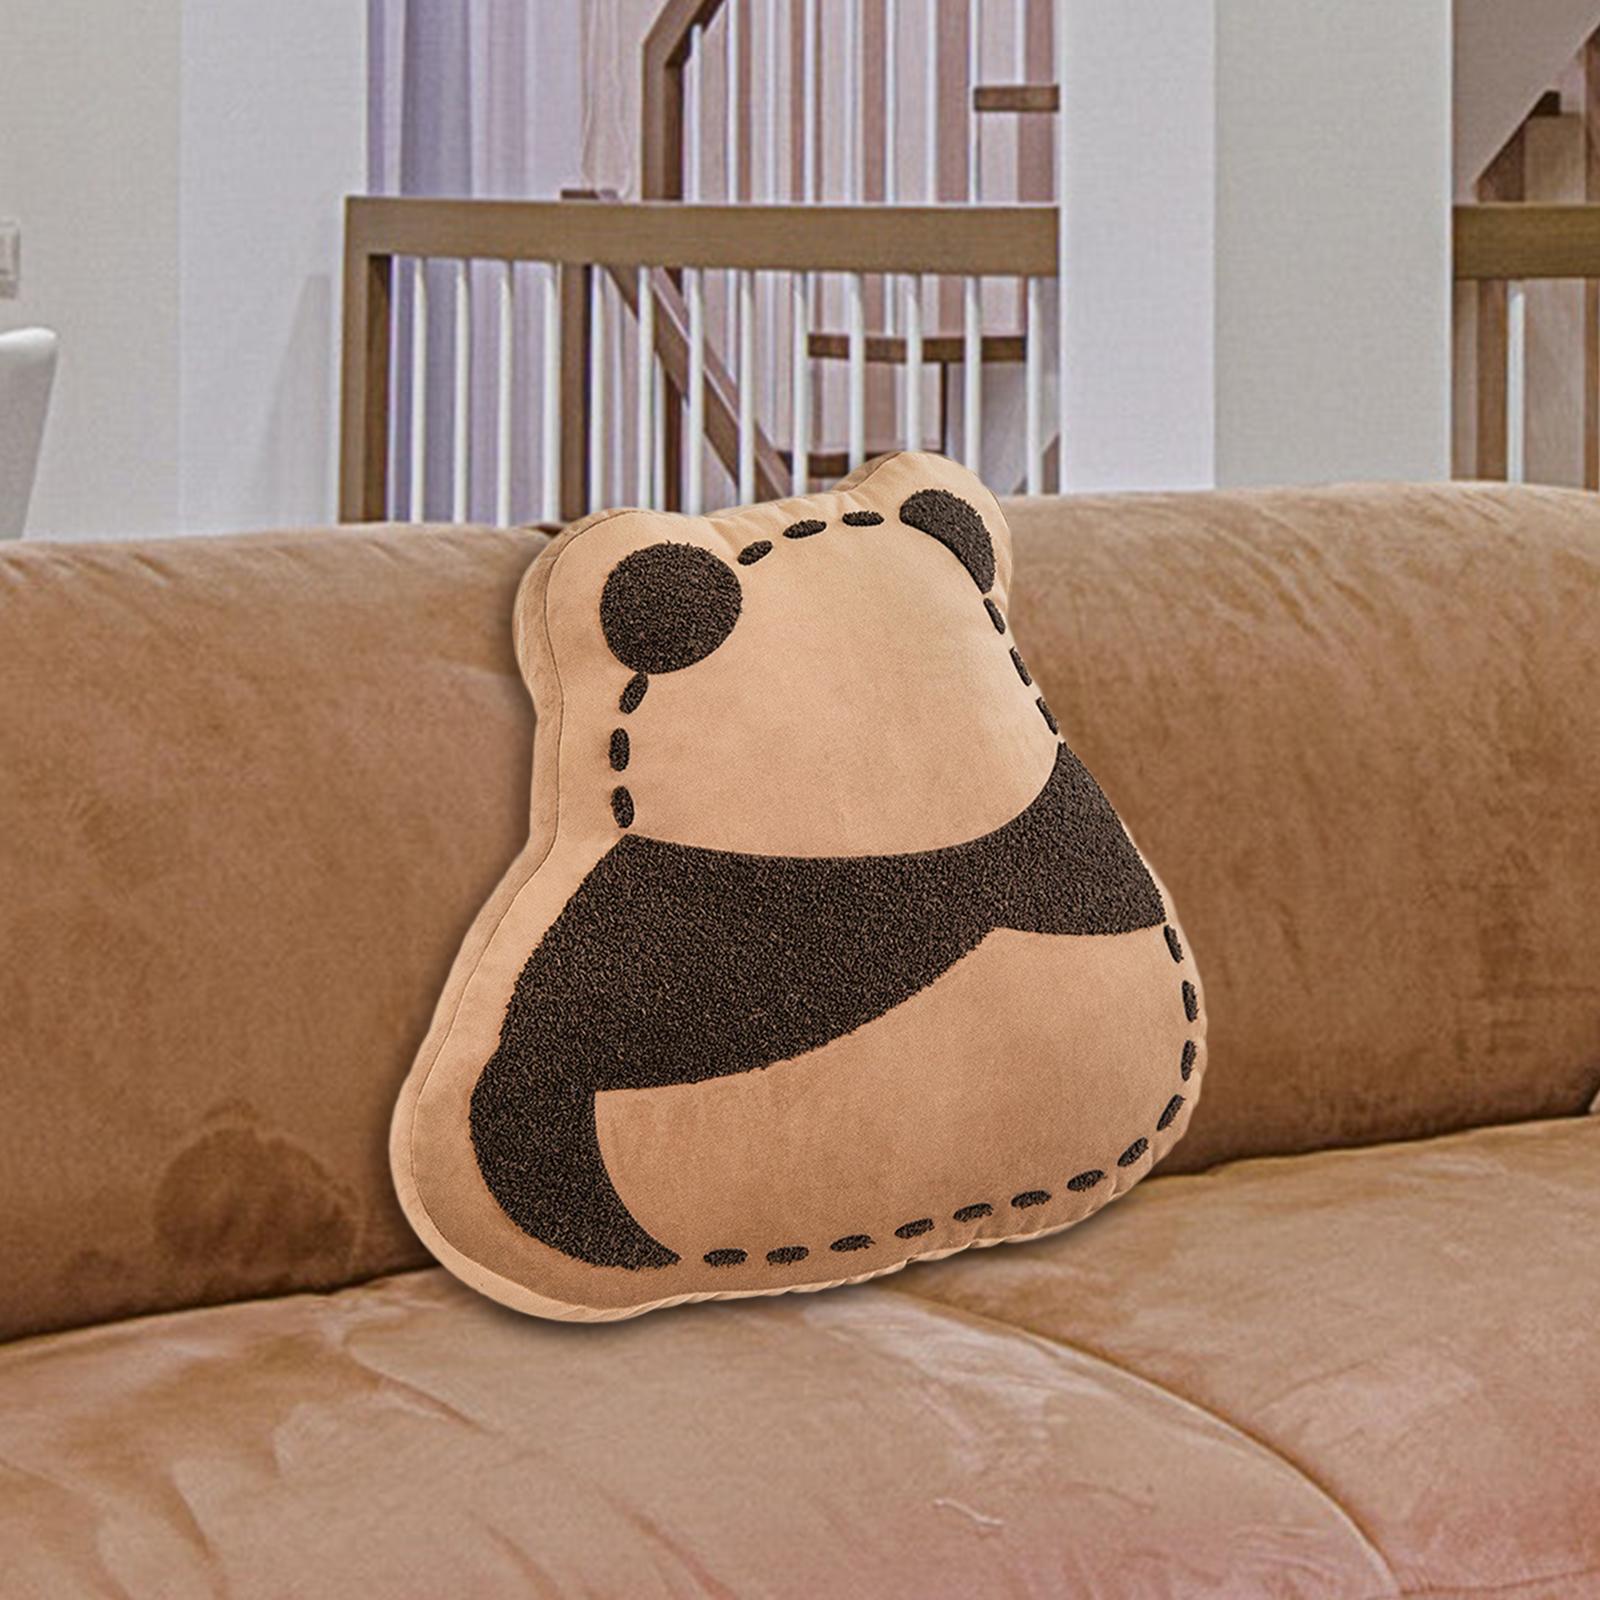 Panda Plush Pillow Soft Gifts Cute Plush Toy for Adults Gaming Bedroom Brown